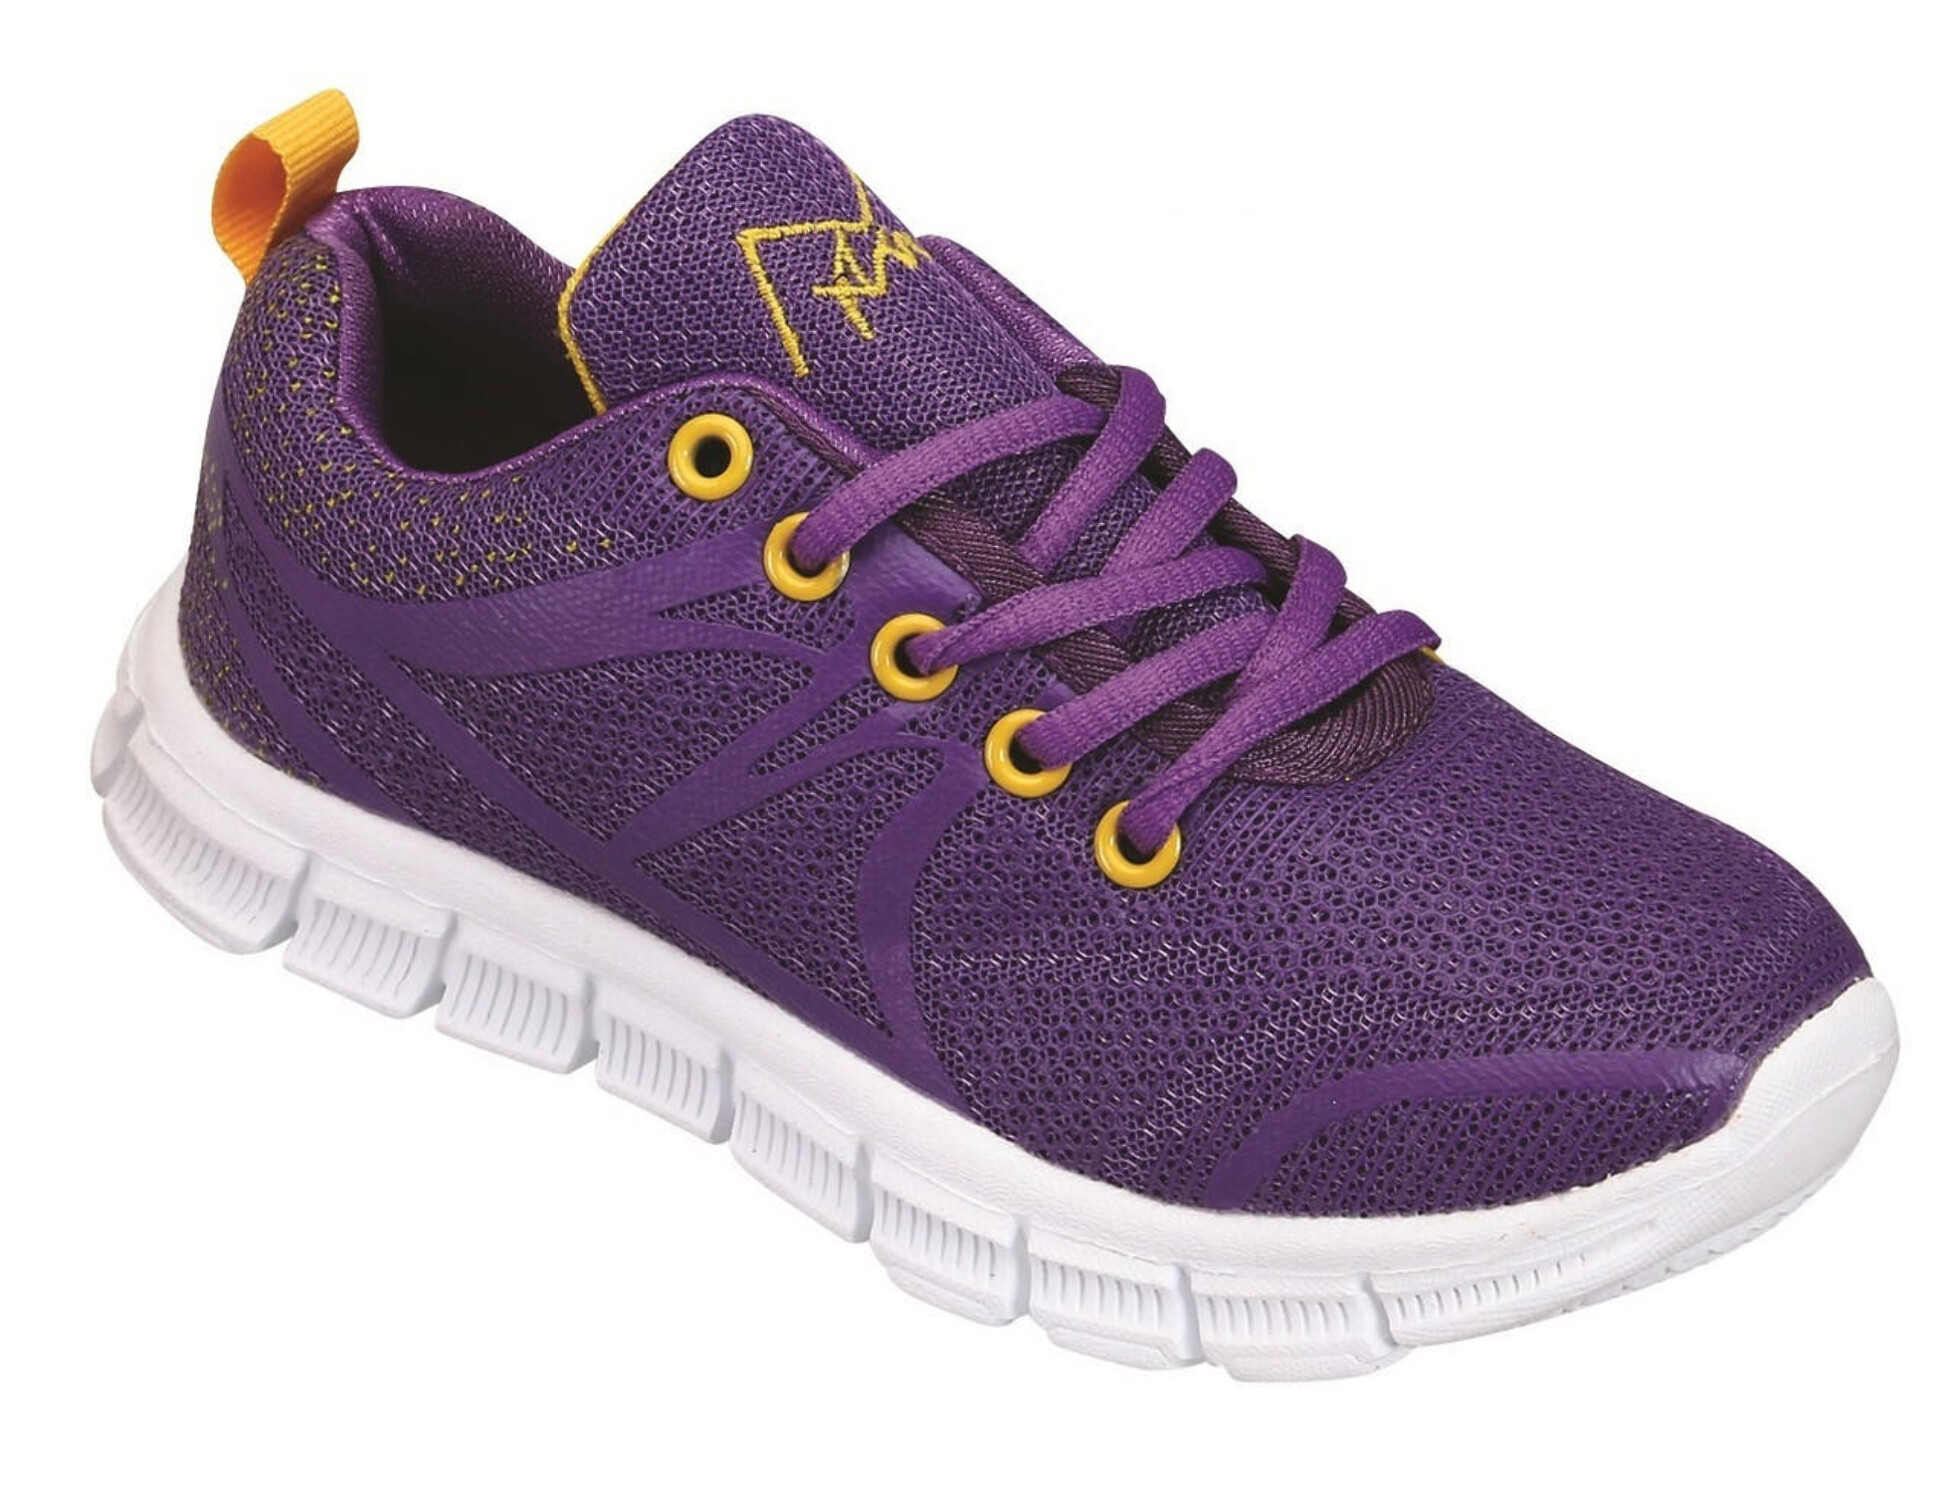 MAIR Kids Ultra Lightweight PACER Athletic Sneaker Shoe - image 3 of 4